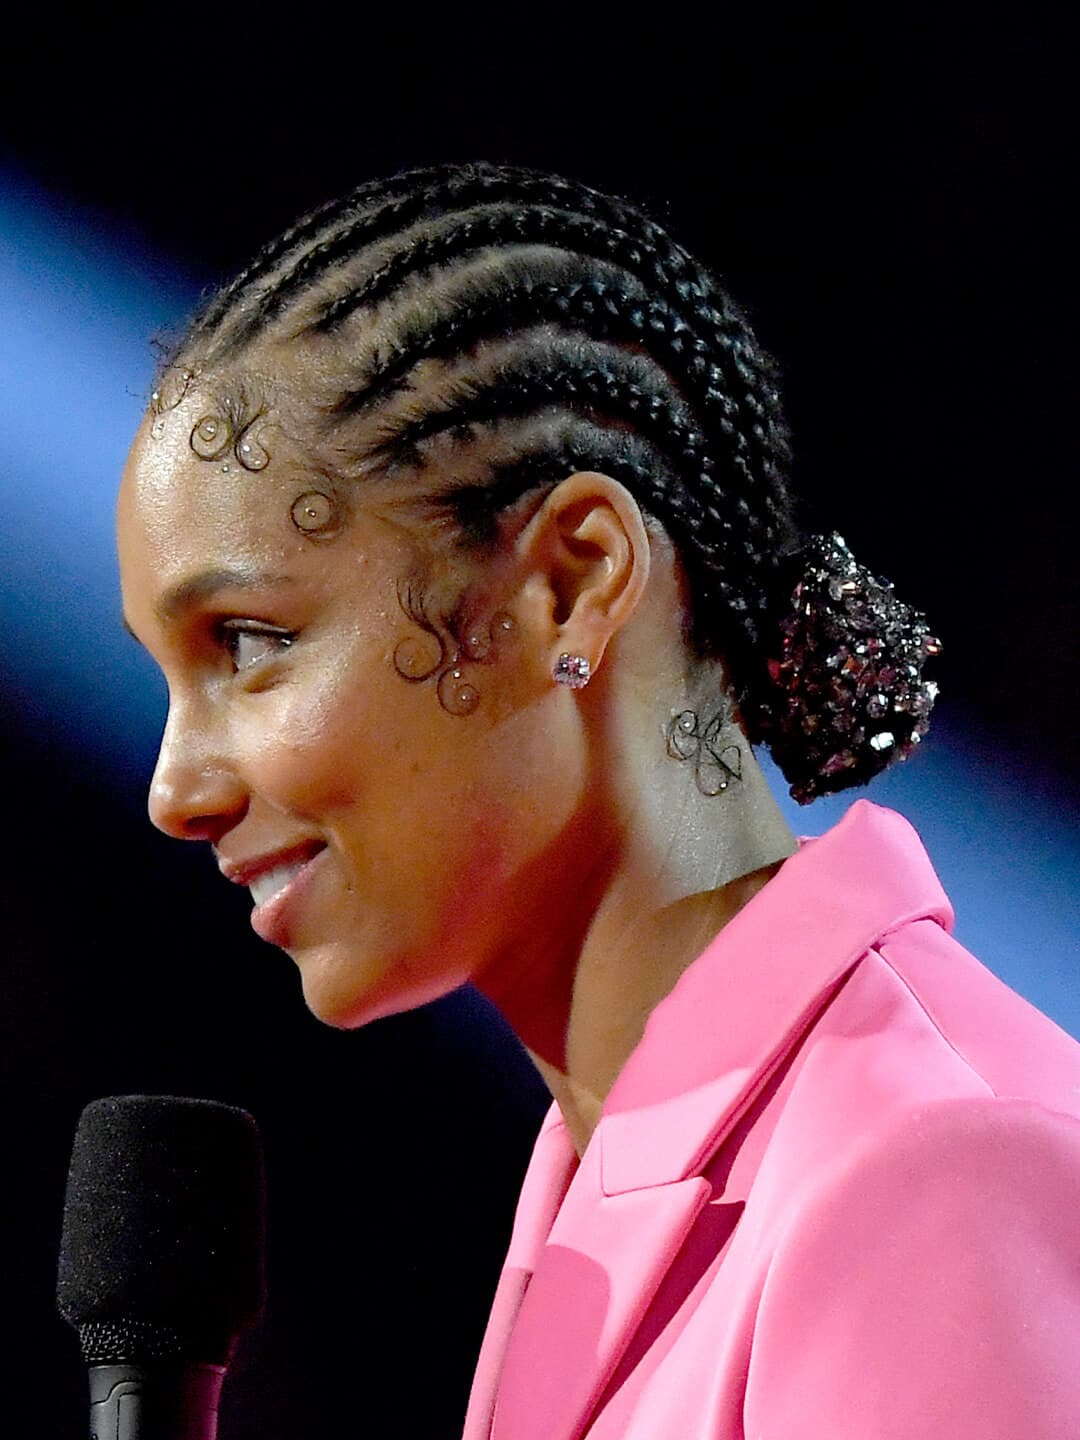 Side profile of Alicia Keys in a pink suit rocking a bejeweled, braided low bun hairstyle 